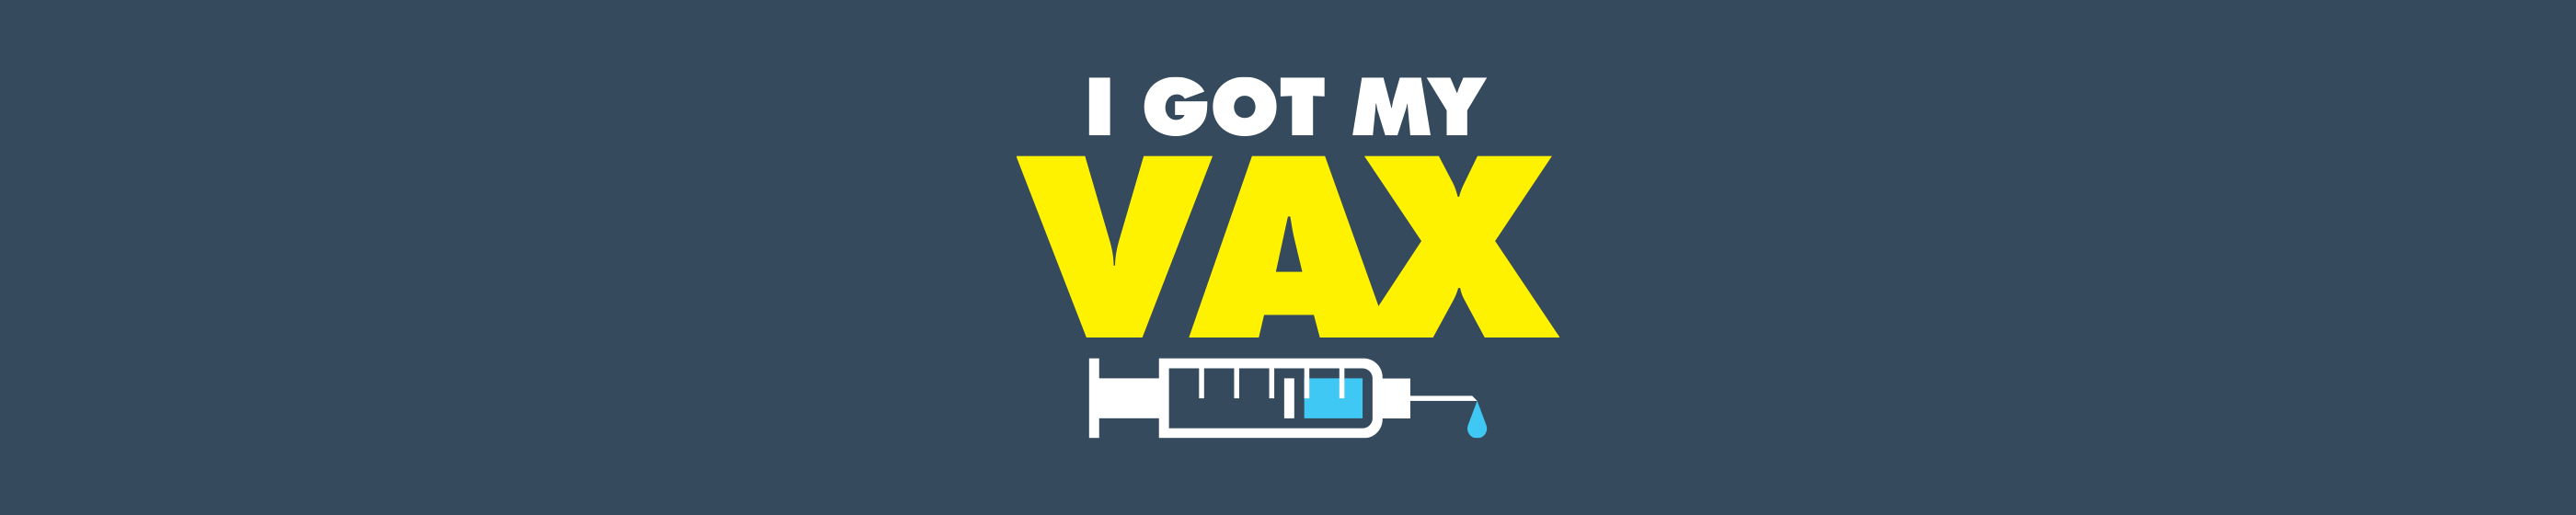 I Got My Vax Button Cover Image